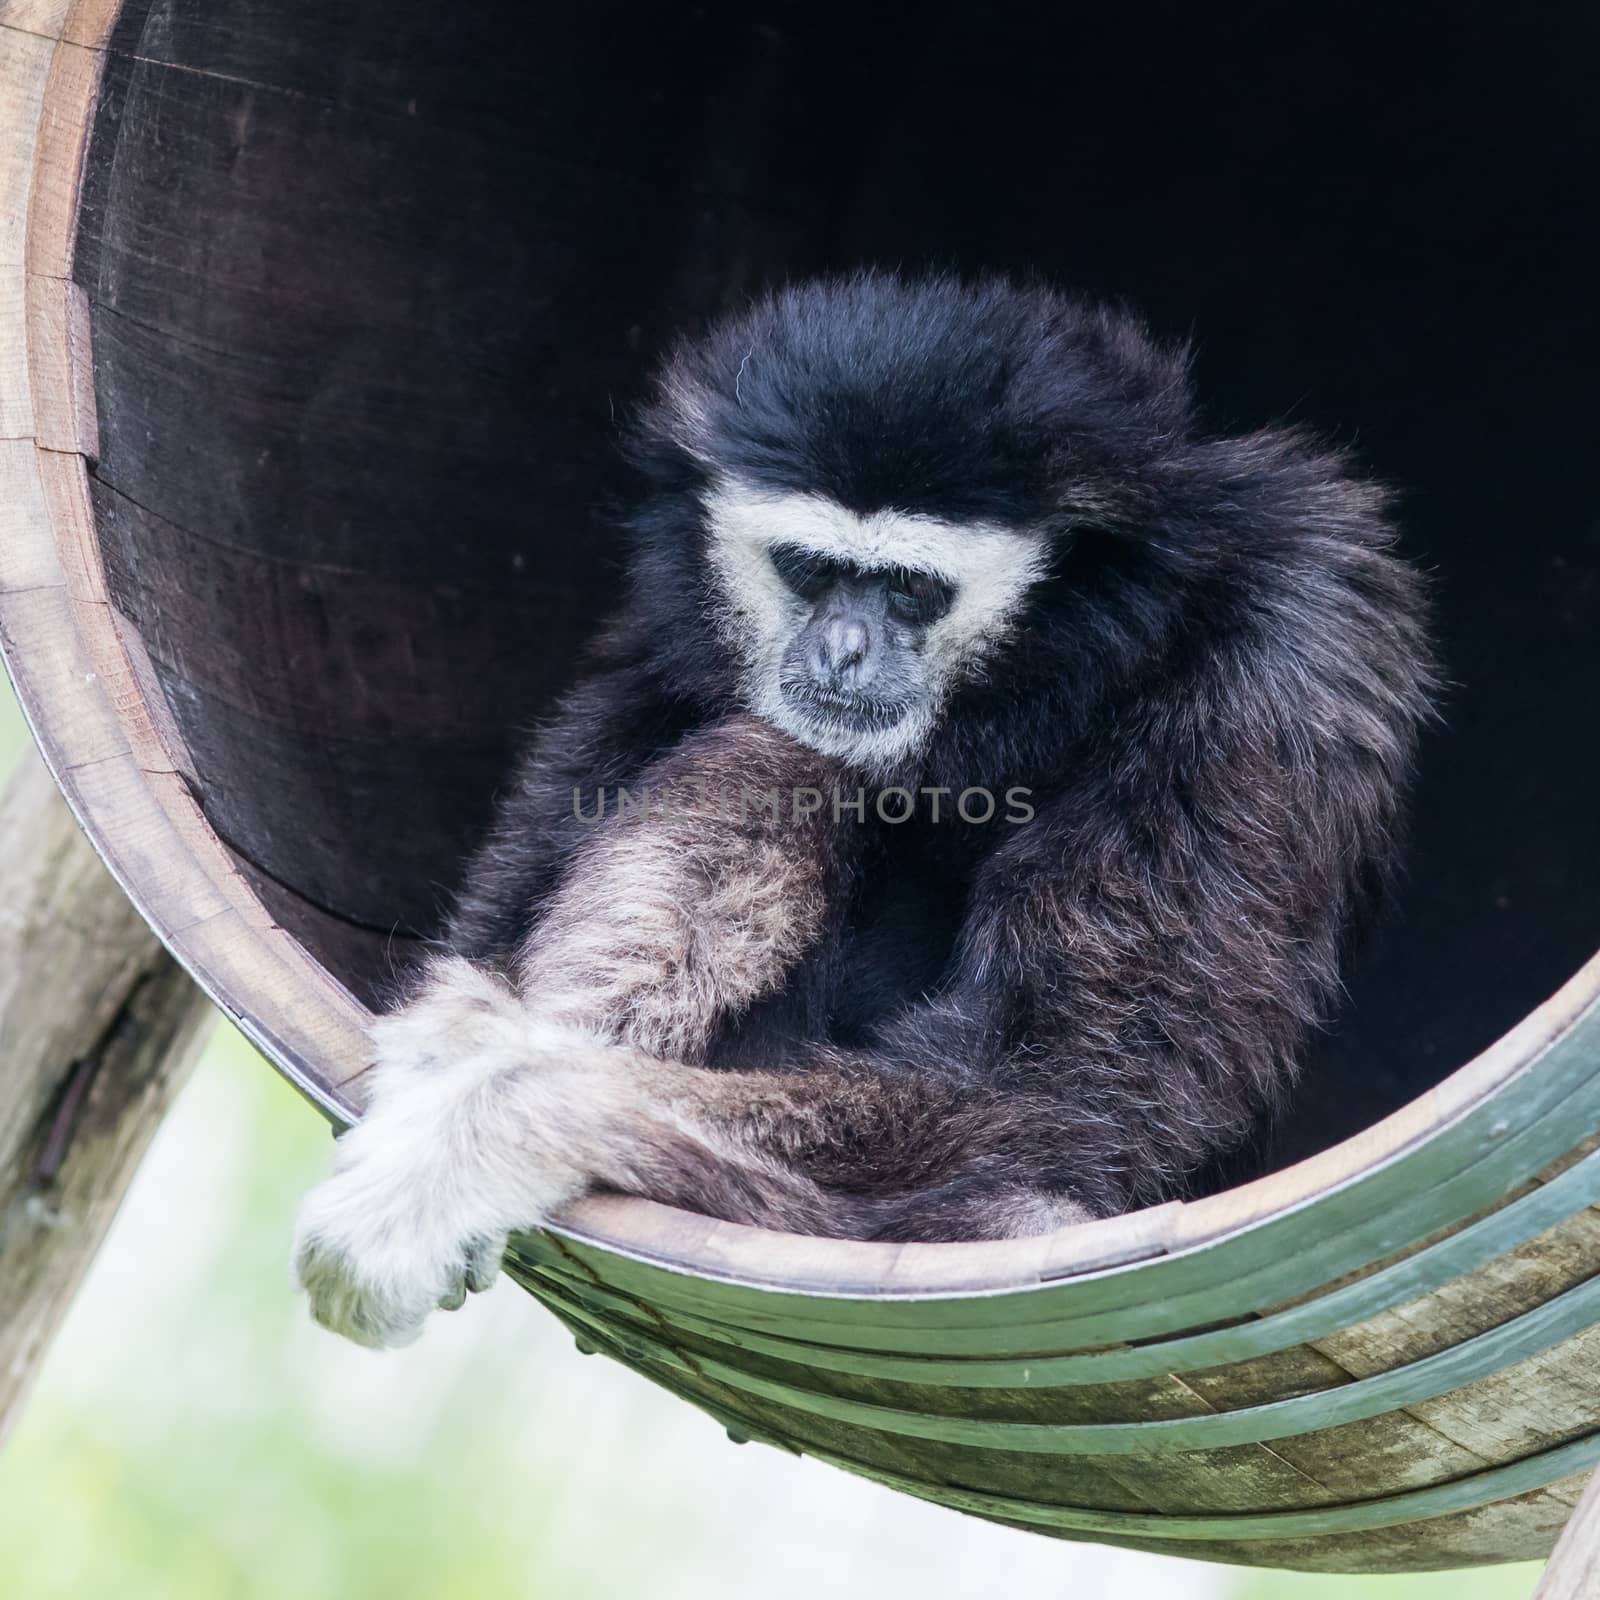 White handed gibbon sitting in a barrel by michaklootwijk